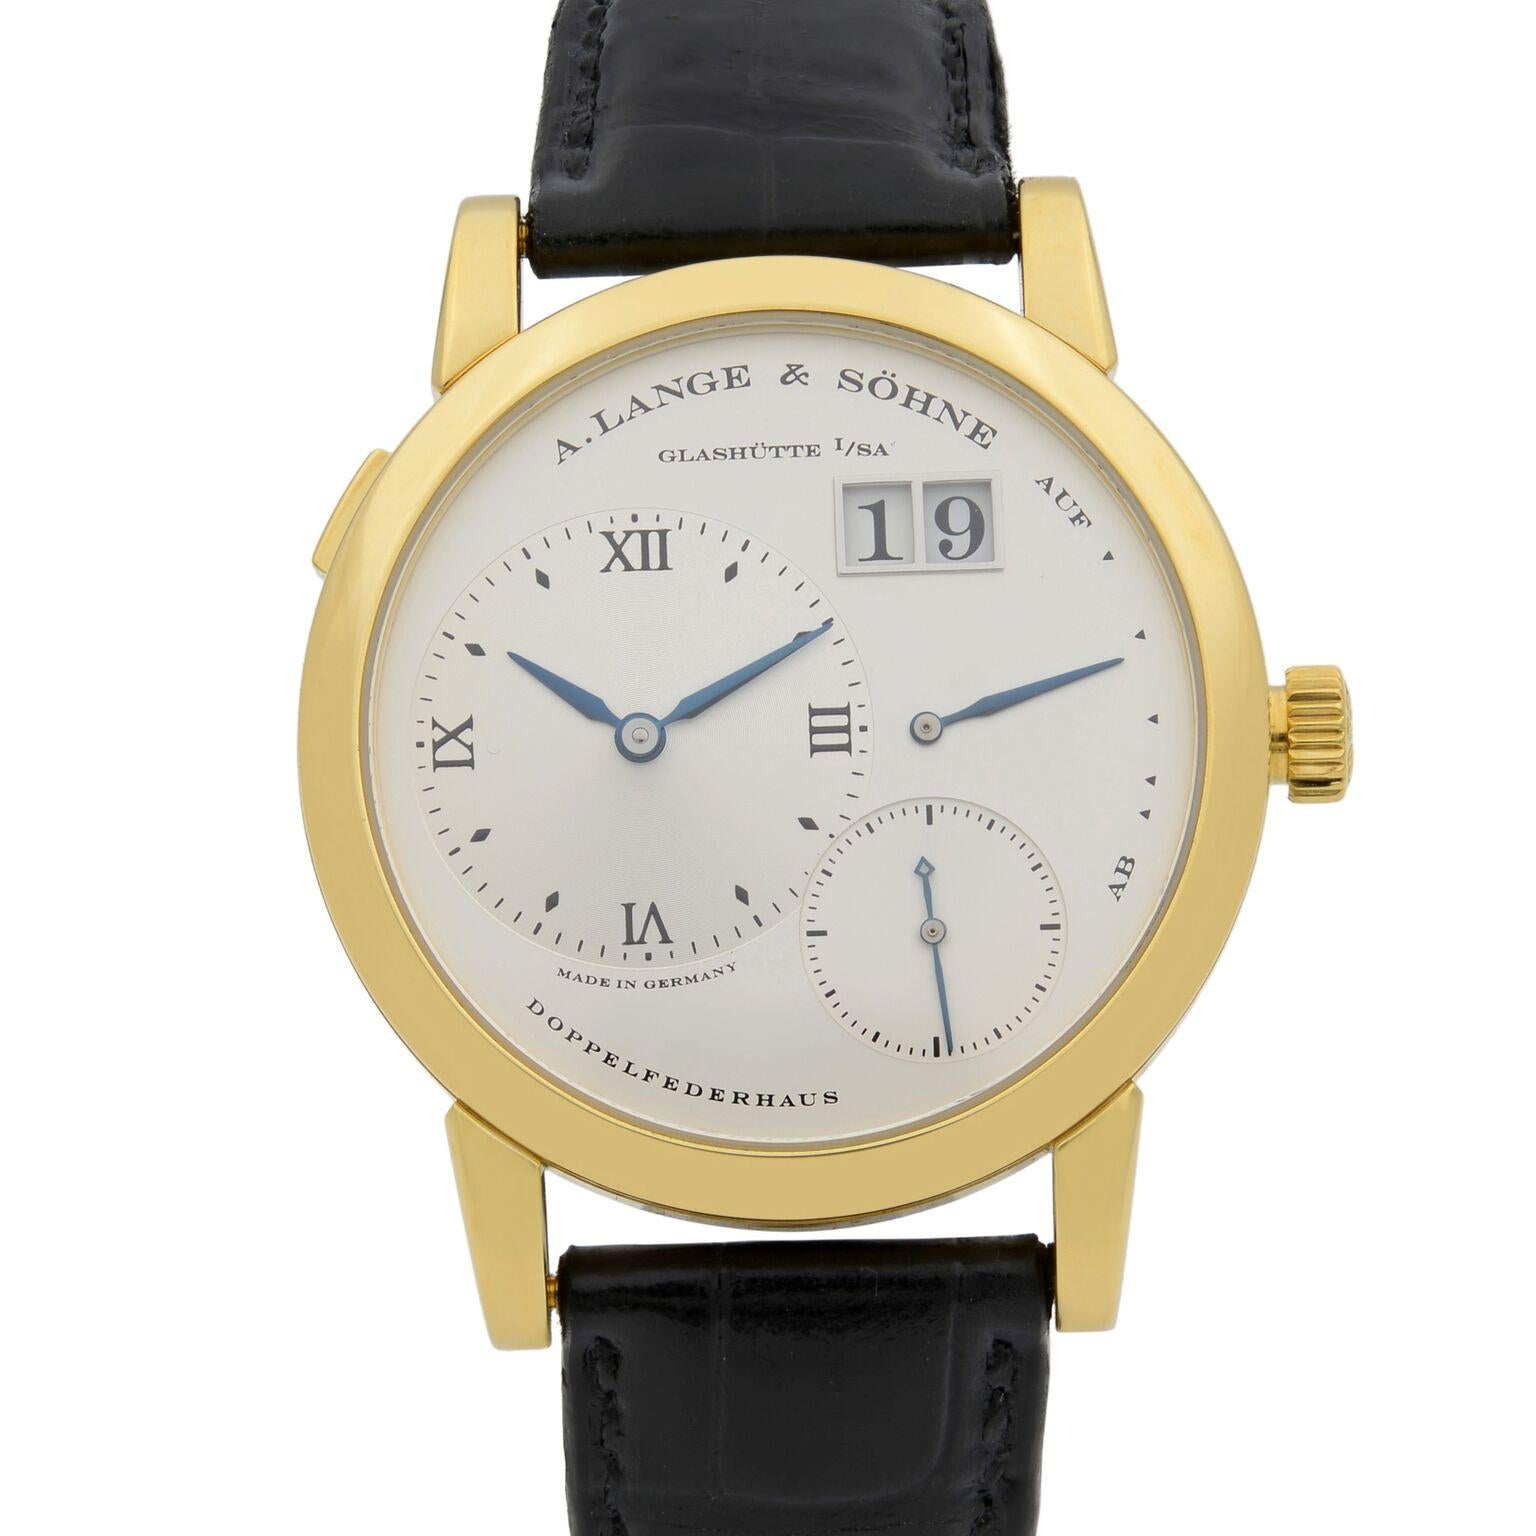 This pre-owned A. Lange & Sohne  101.022 is a beautiful men's timepiece that is powered by mechanical (hand-winding) movement which is cased in a yellow gold case. It has a round shape face, date indicator, small seconds subdial dial, and has hand